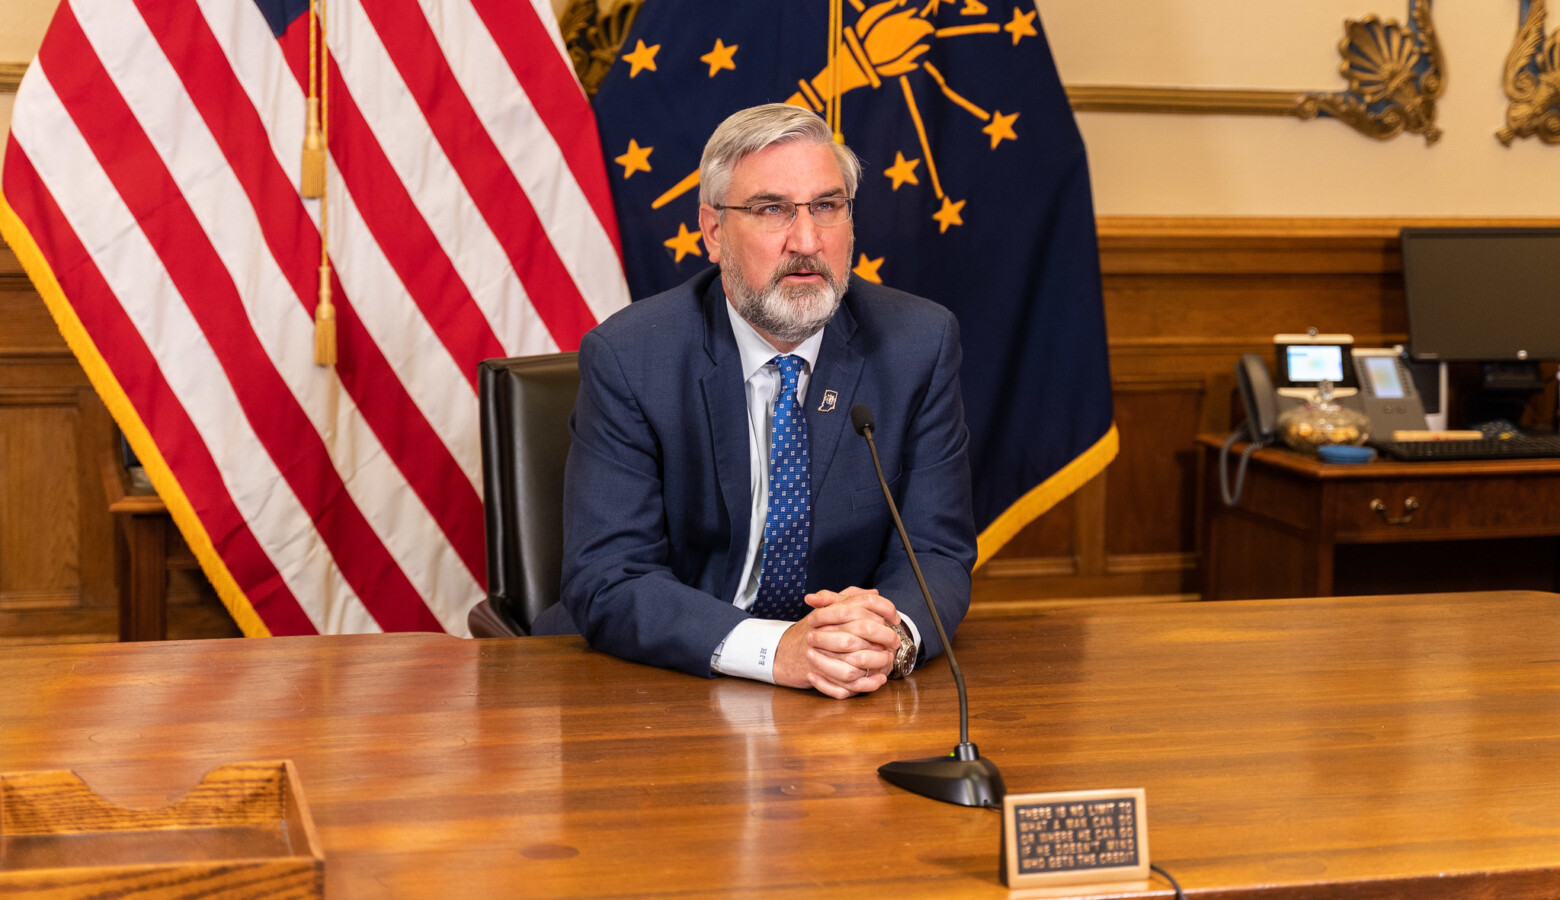 Gov. Eric Holcomb announced in a statewide address he will end all statewide COVID-19 restrictions on April 6. (Courtesy of the governor's office)